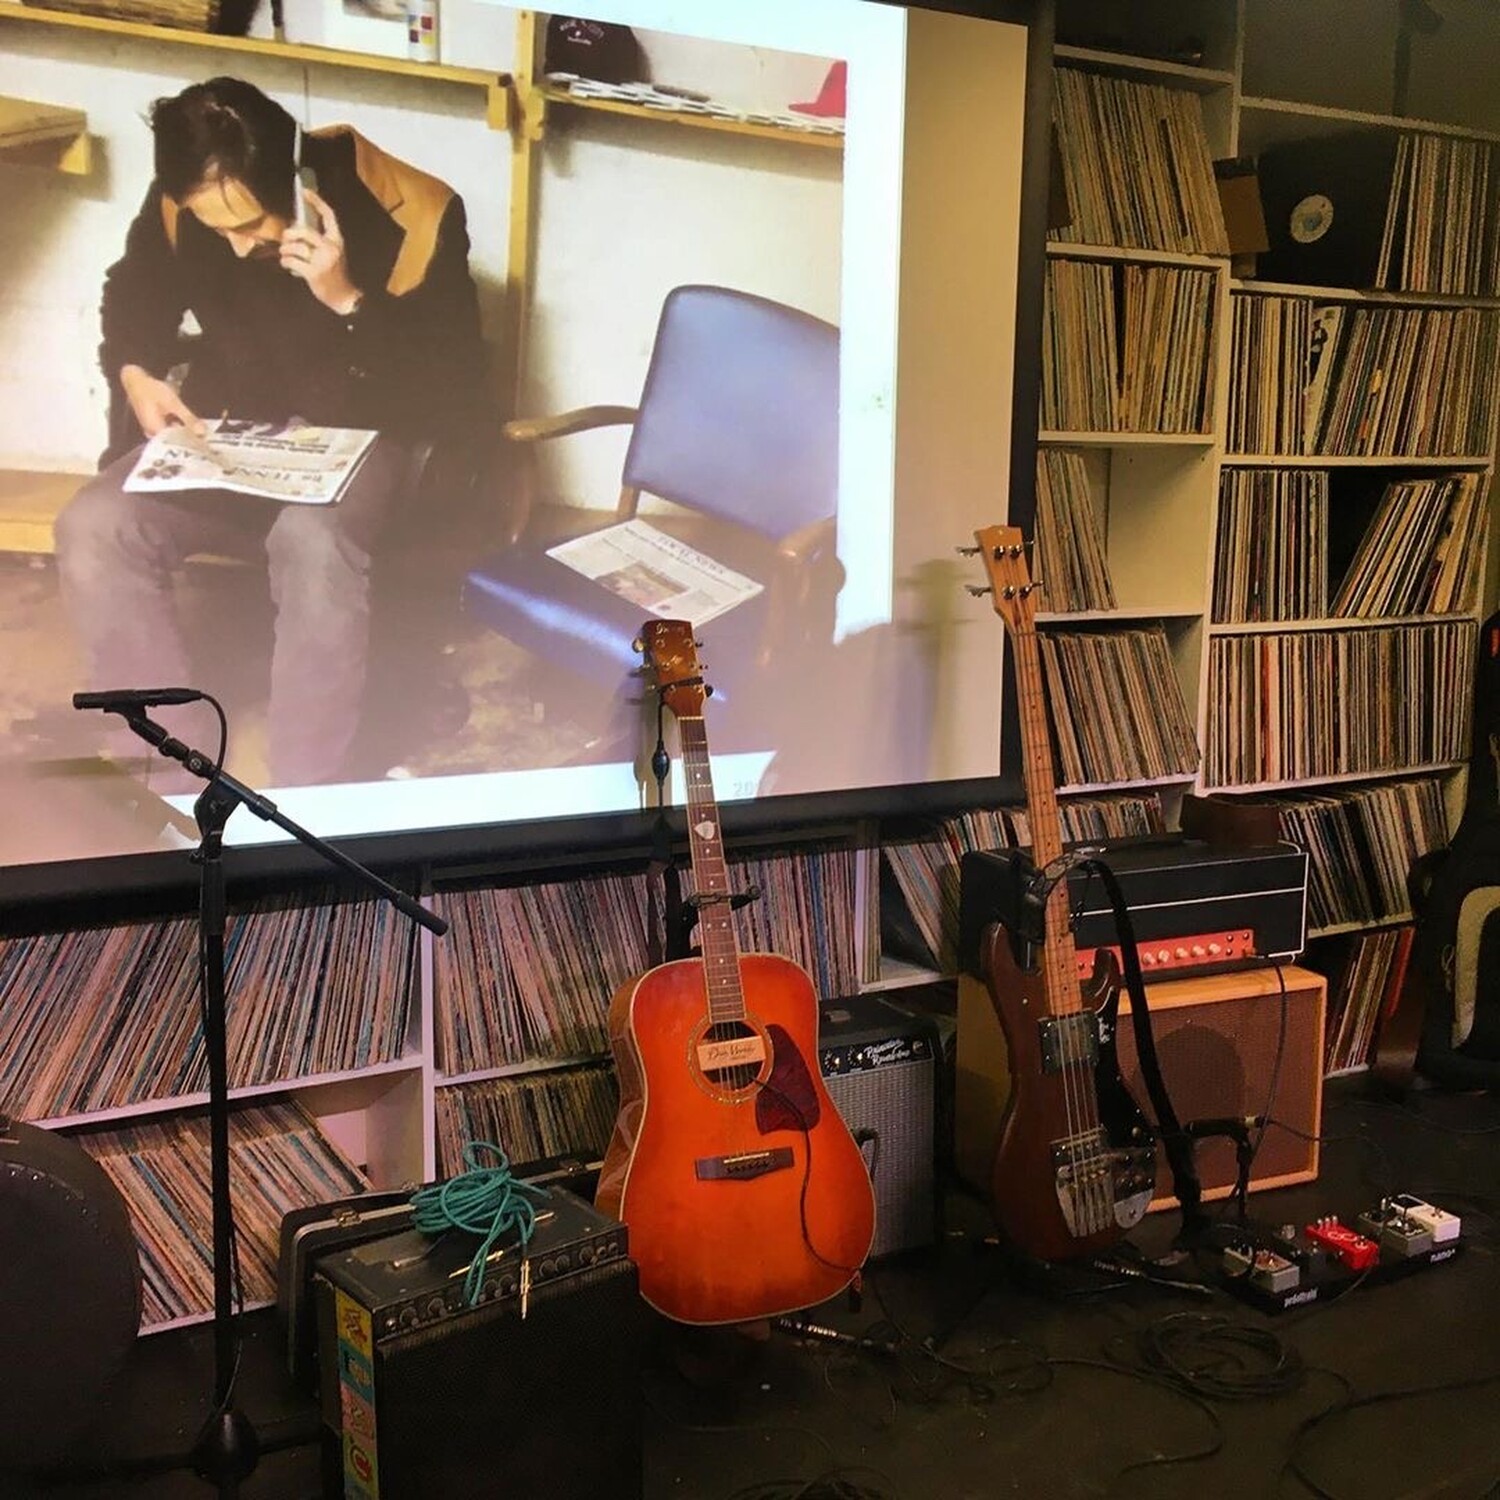 That's the WTJU Stage and screen. Before the musical tribute performances, the David Berman memorial event featured a photo slideshow of scenes from David's life.